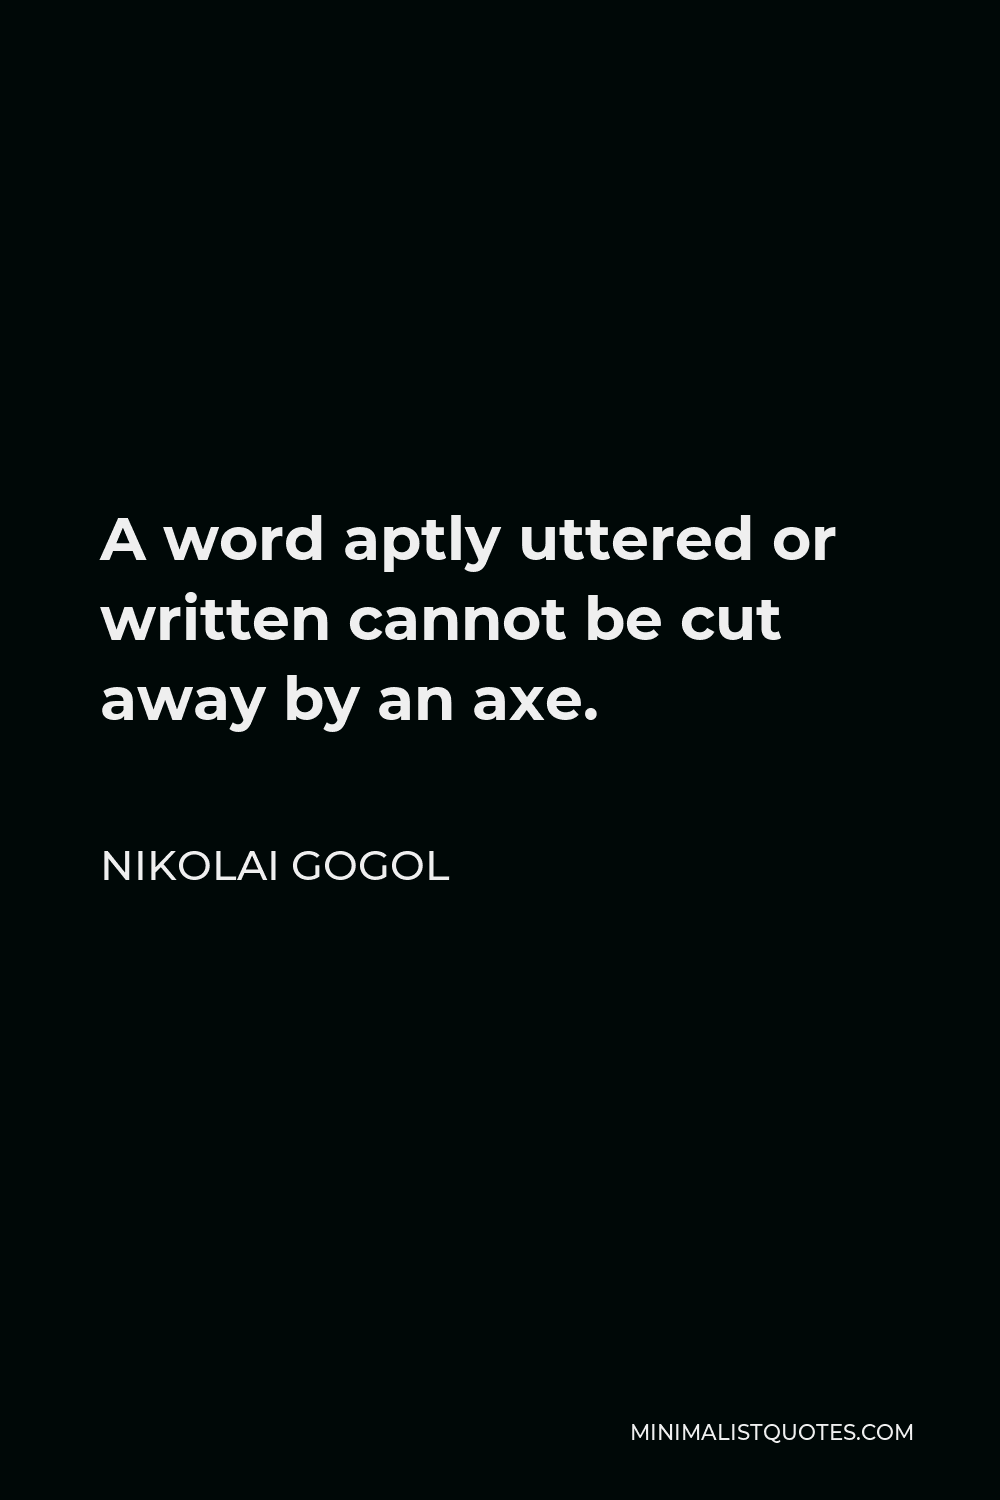 Nikolai Gogol Quote - A word aptly uttered or written cannot be cut away by an axe.